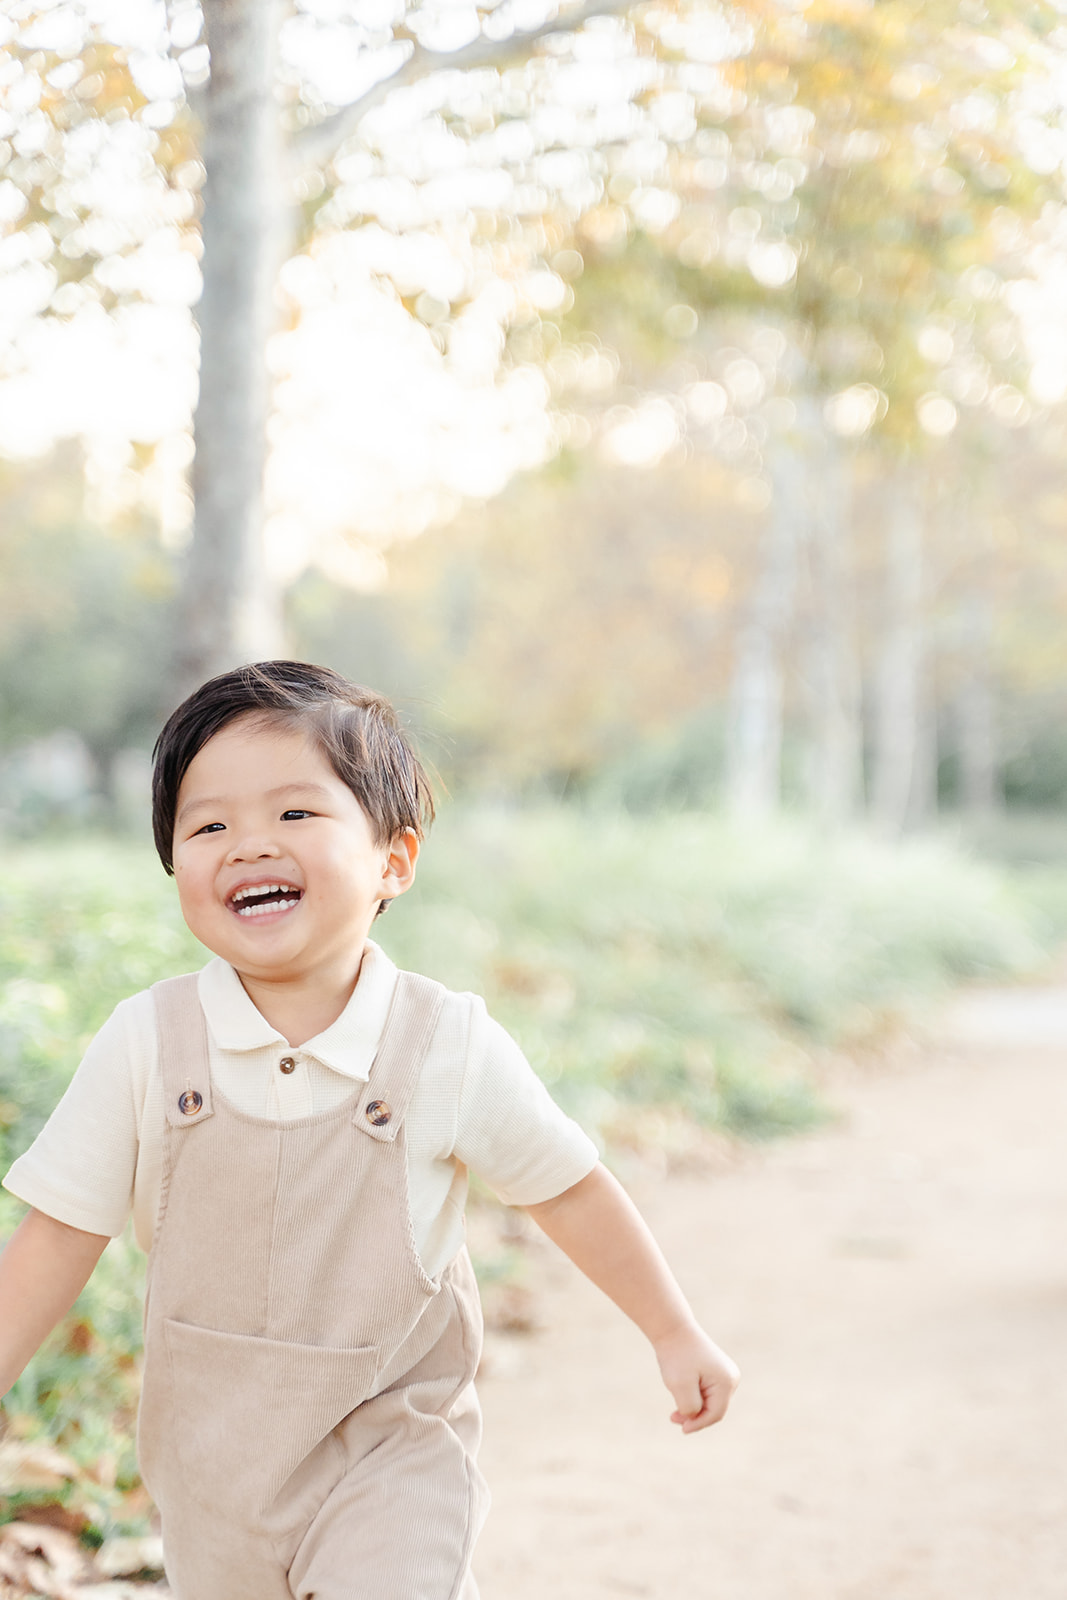 A young boy in tan overalls smiles while walking down a park path at sunset after attending Preschool in Irvine